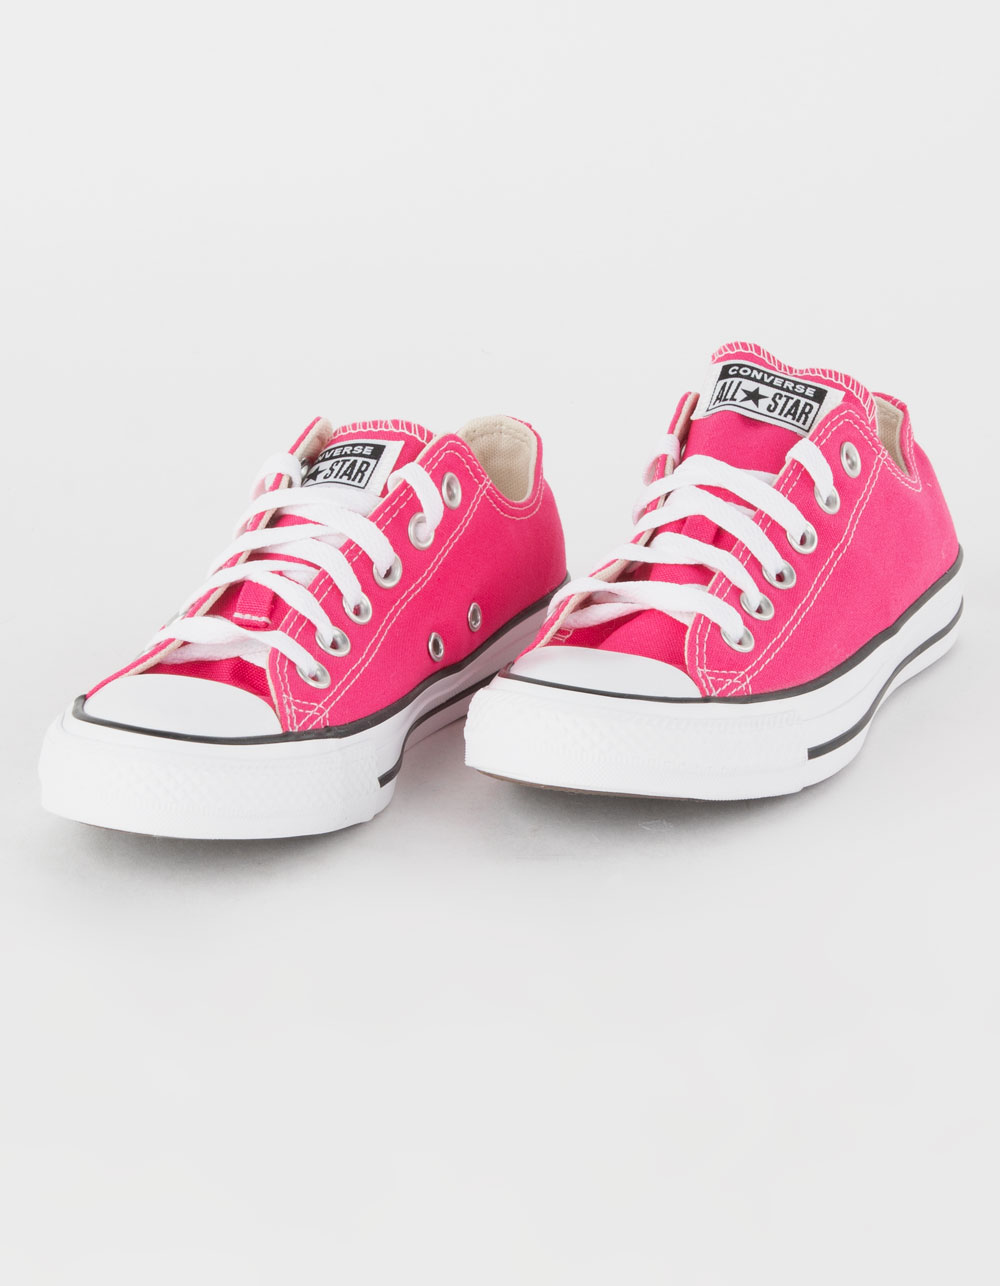 Converse Neon Pink Low Tops | atelier-yuwa.ciao.jp